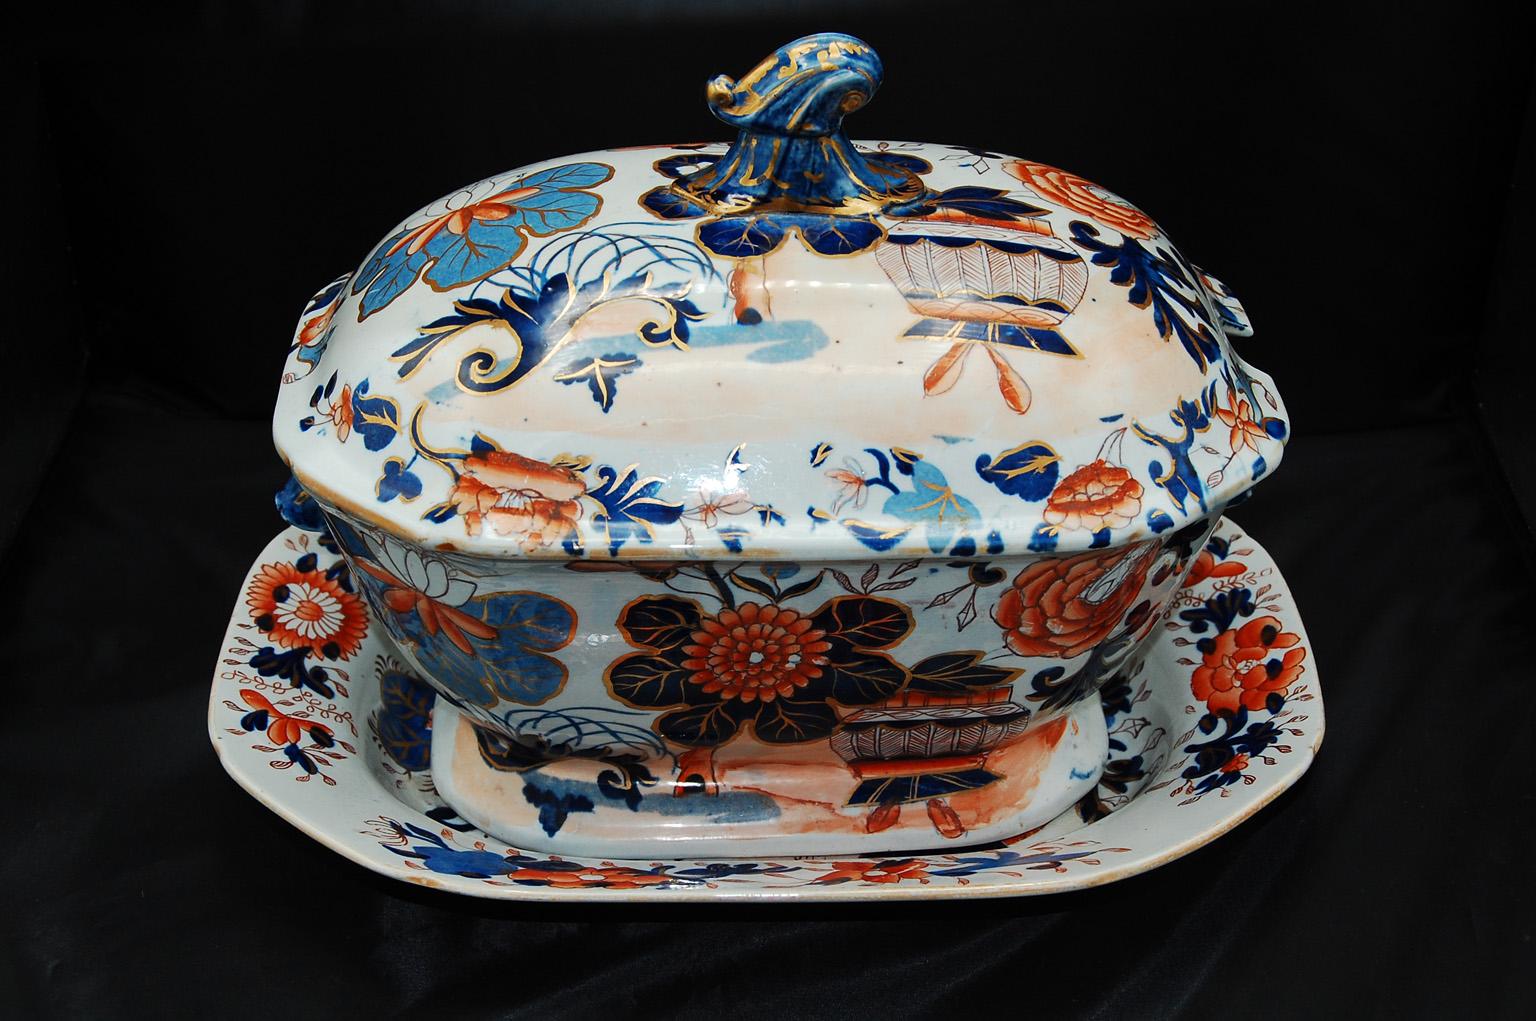 English Early 19th century Mason's ironstone soup tureen, lid and underliner in one of the 